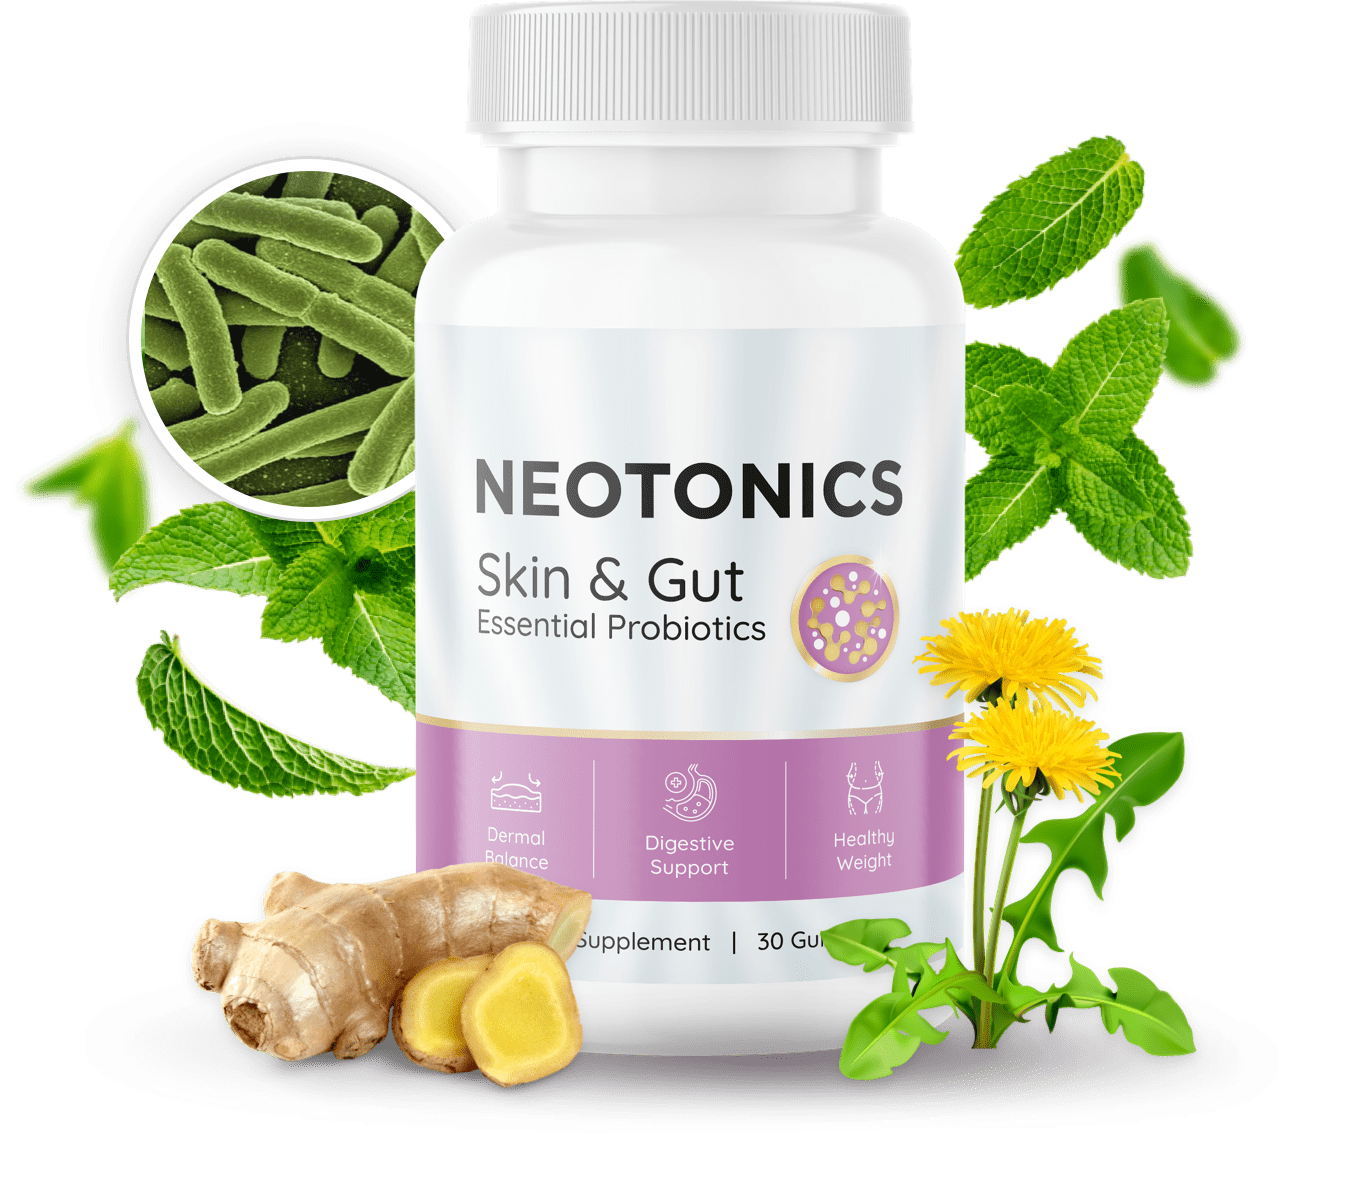 Revitalize Your Radiance: Neotonics Skincare and Gut Supplement for Glowing Skin